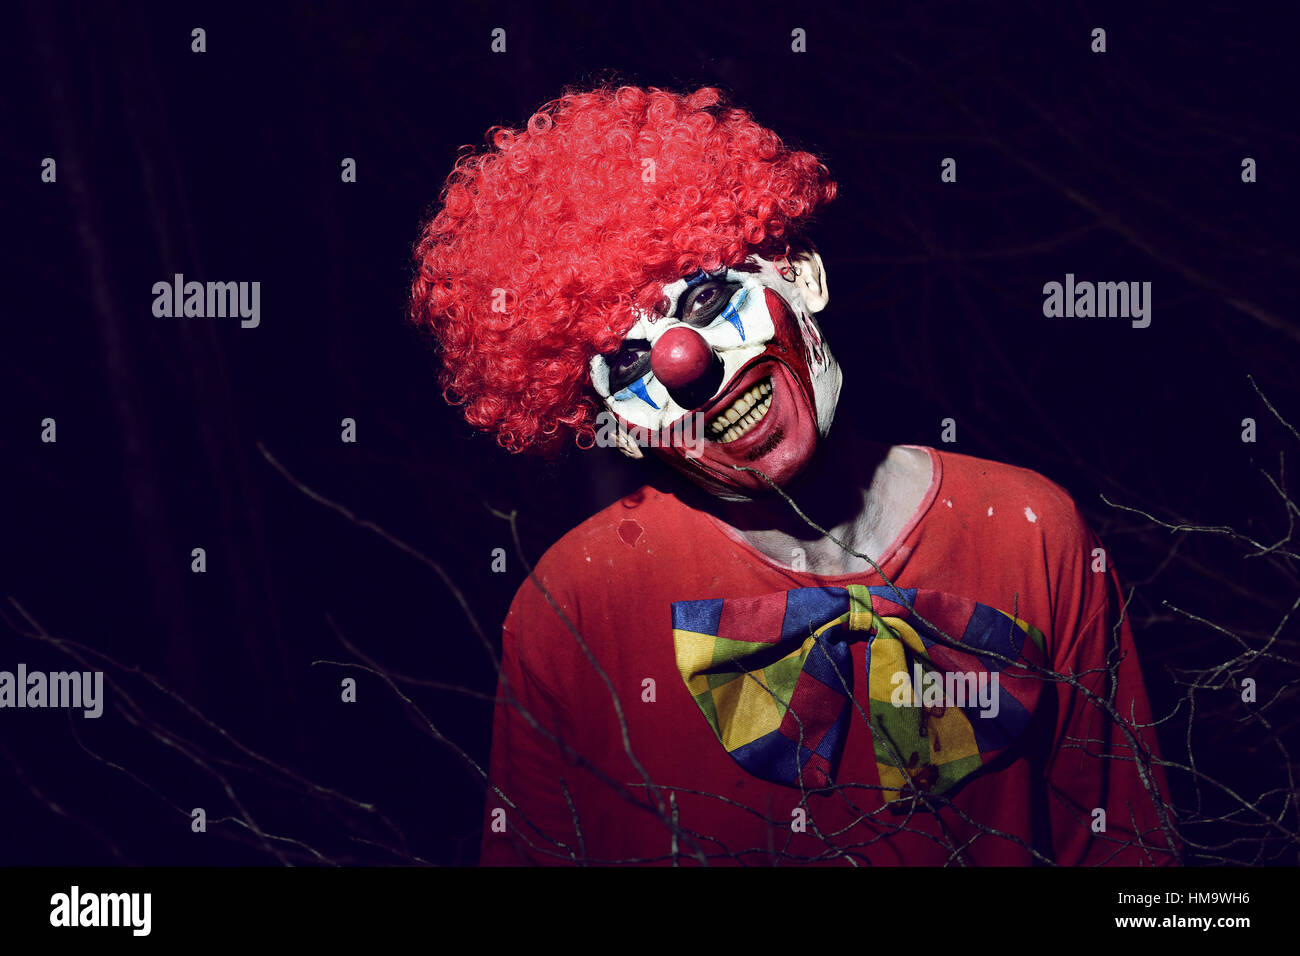 closeup of a scary evil clown wearing a red wig and a dirty costume, in the woods at night Stock Photo